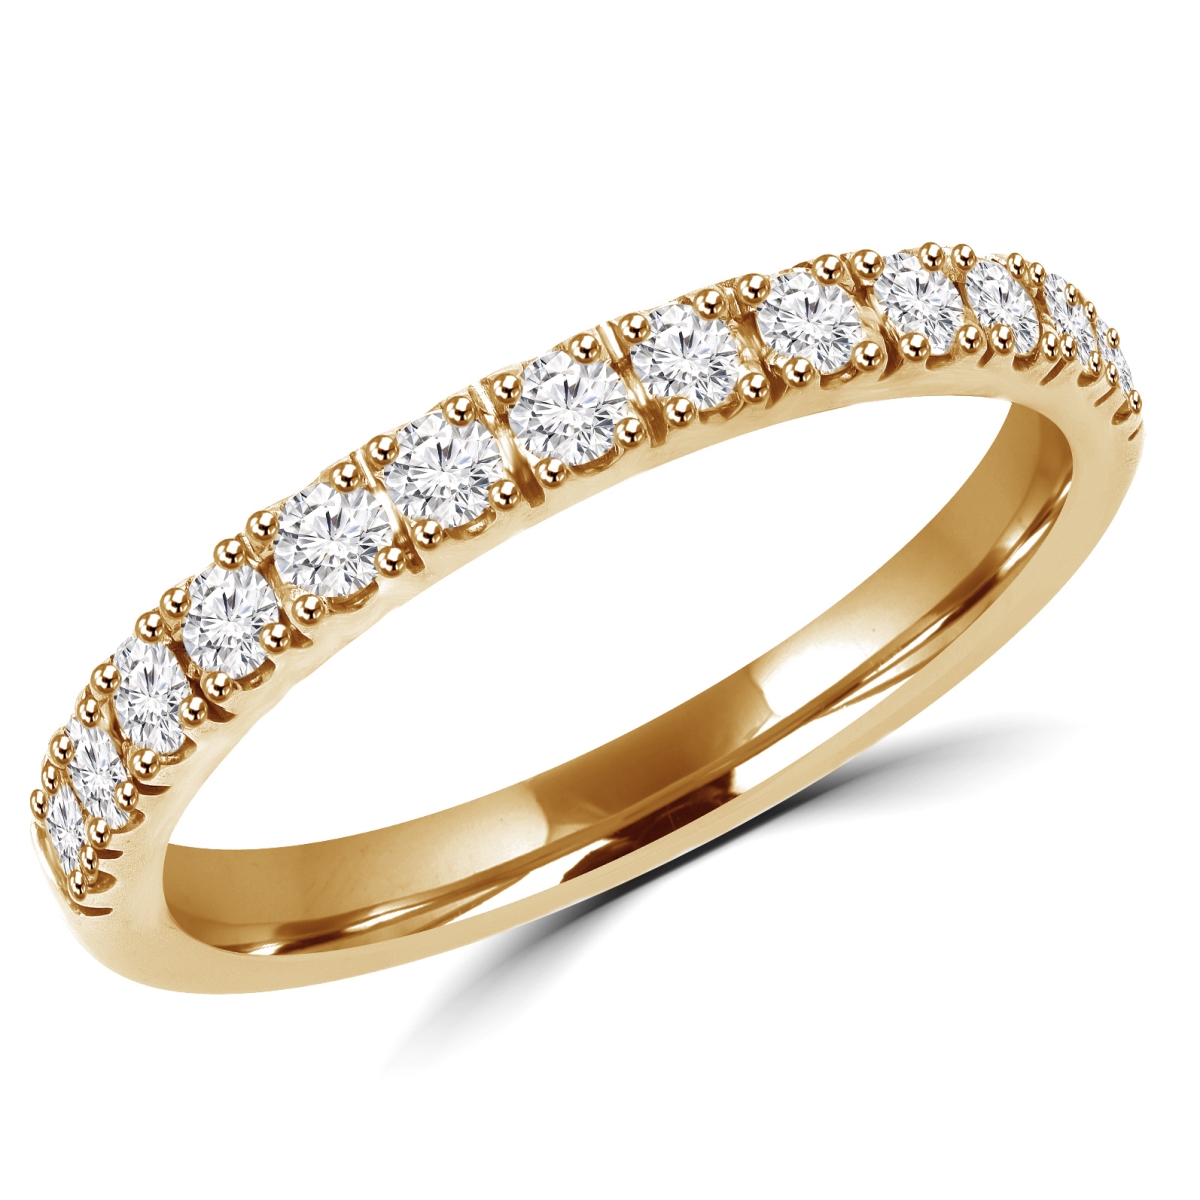 Picture of Majesty Diamonds MD180187-5.5 0.3 CTW Round Diamond Semi-Eternity Wedding Band Ring in 14K Yellow Gold - Size 5.5